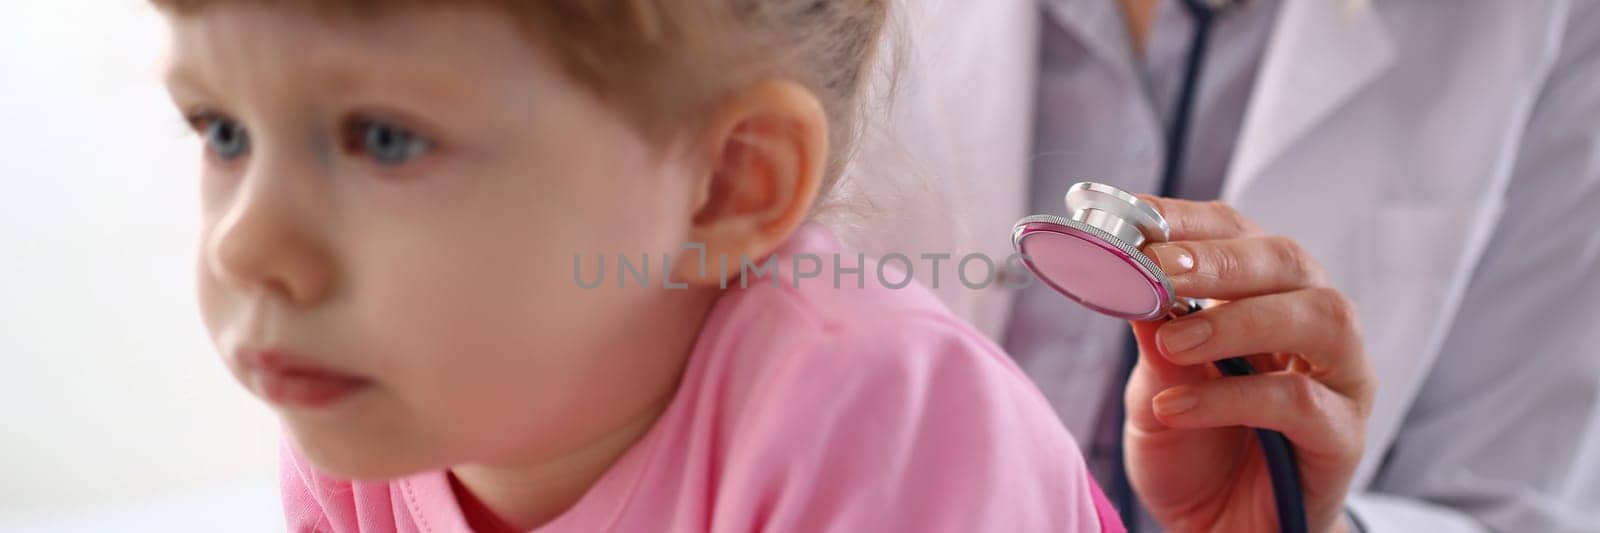 Pediatrician listens to lungs of little girl with stethoscope by kuprevich